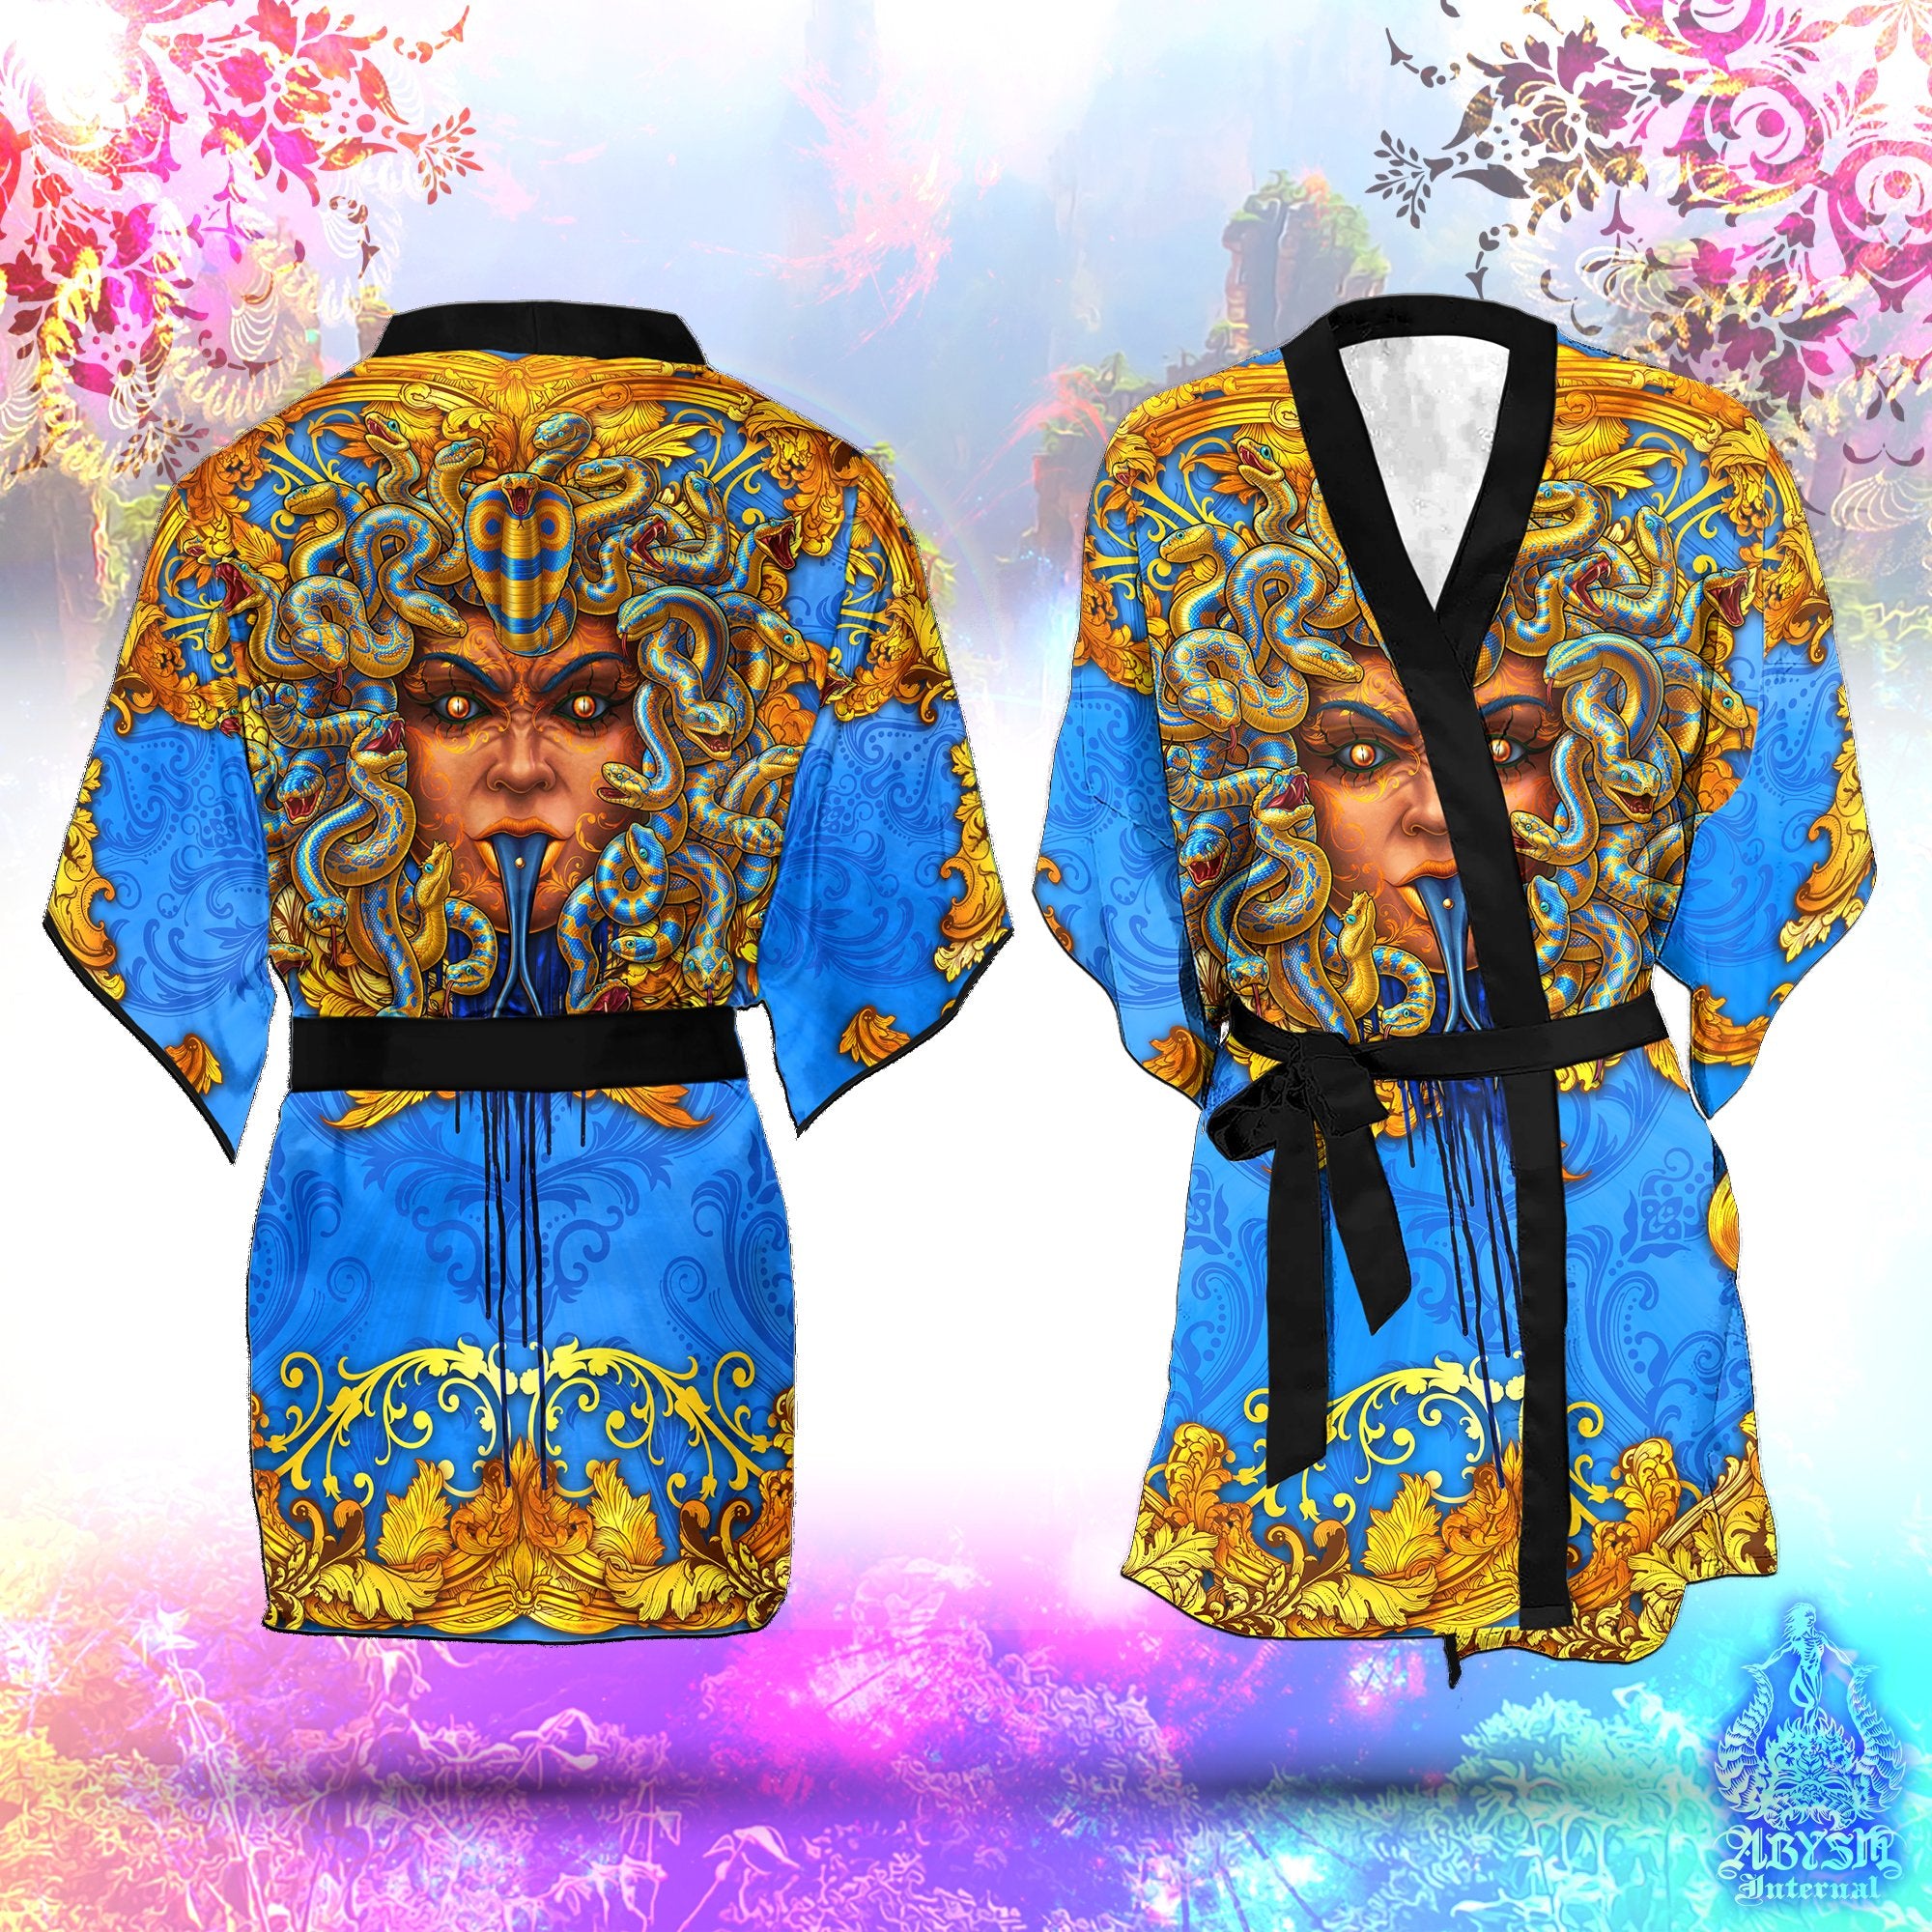 Medusa Skull Short Kimono Robe, Beach Party Outfit, Coverup, Summer Festival, Indie Clothing, Unisex - Cyan Blue Gold - Abysm Internal